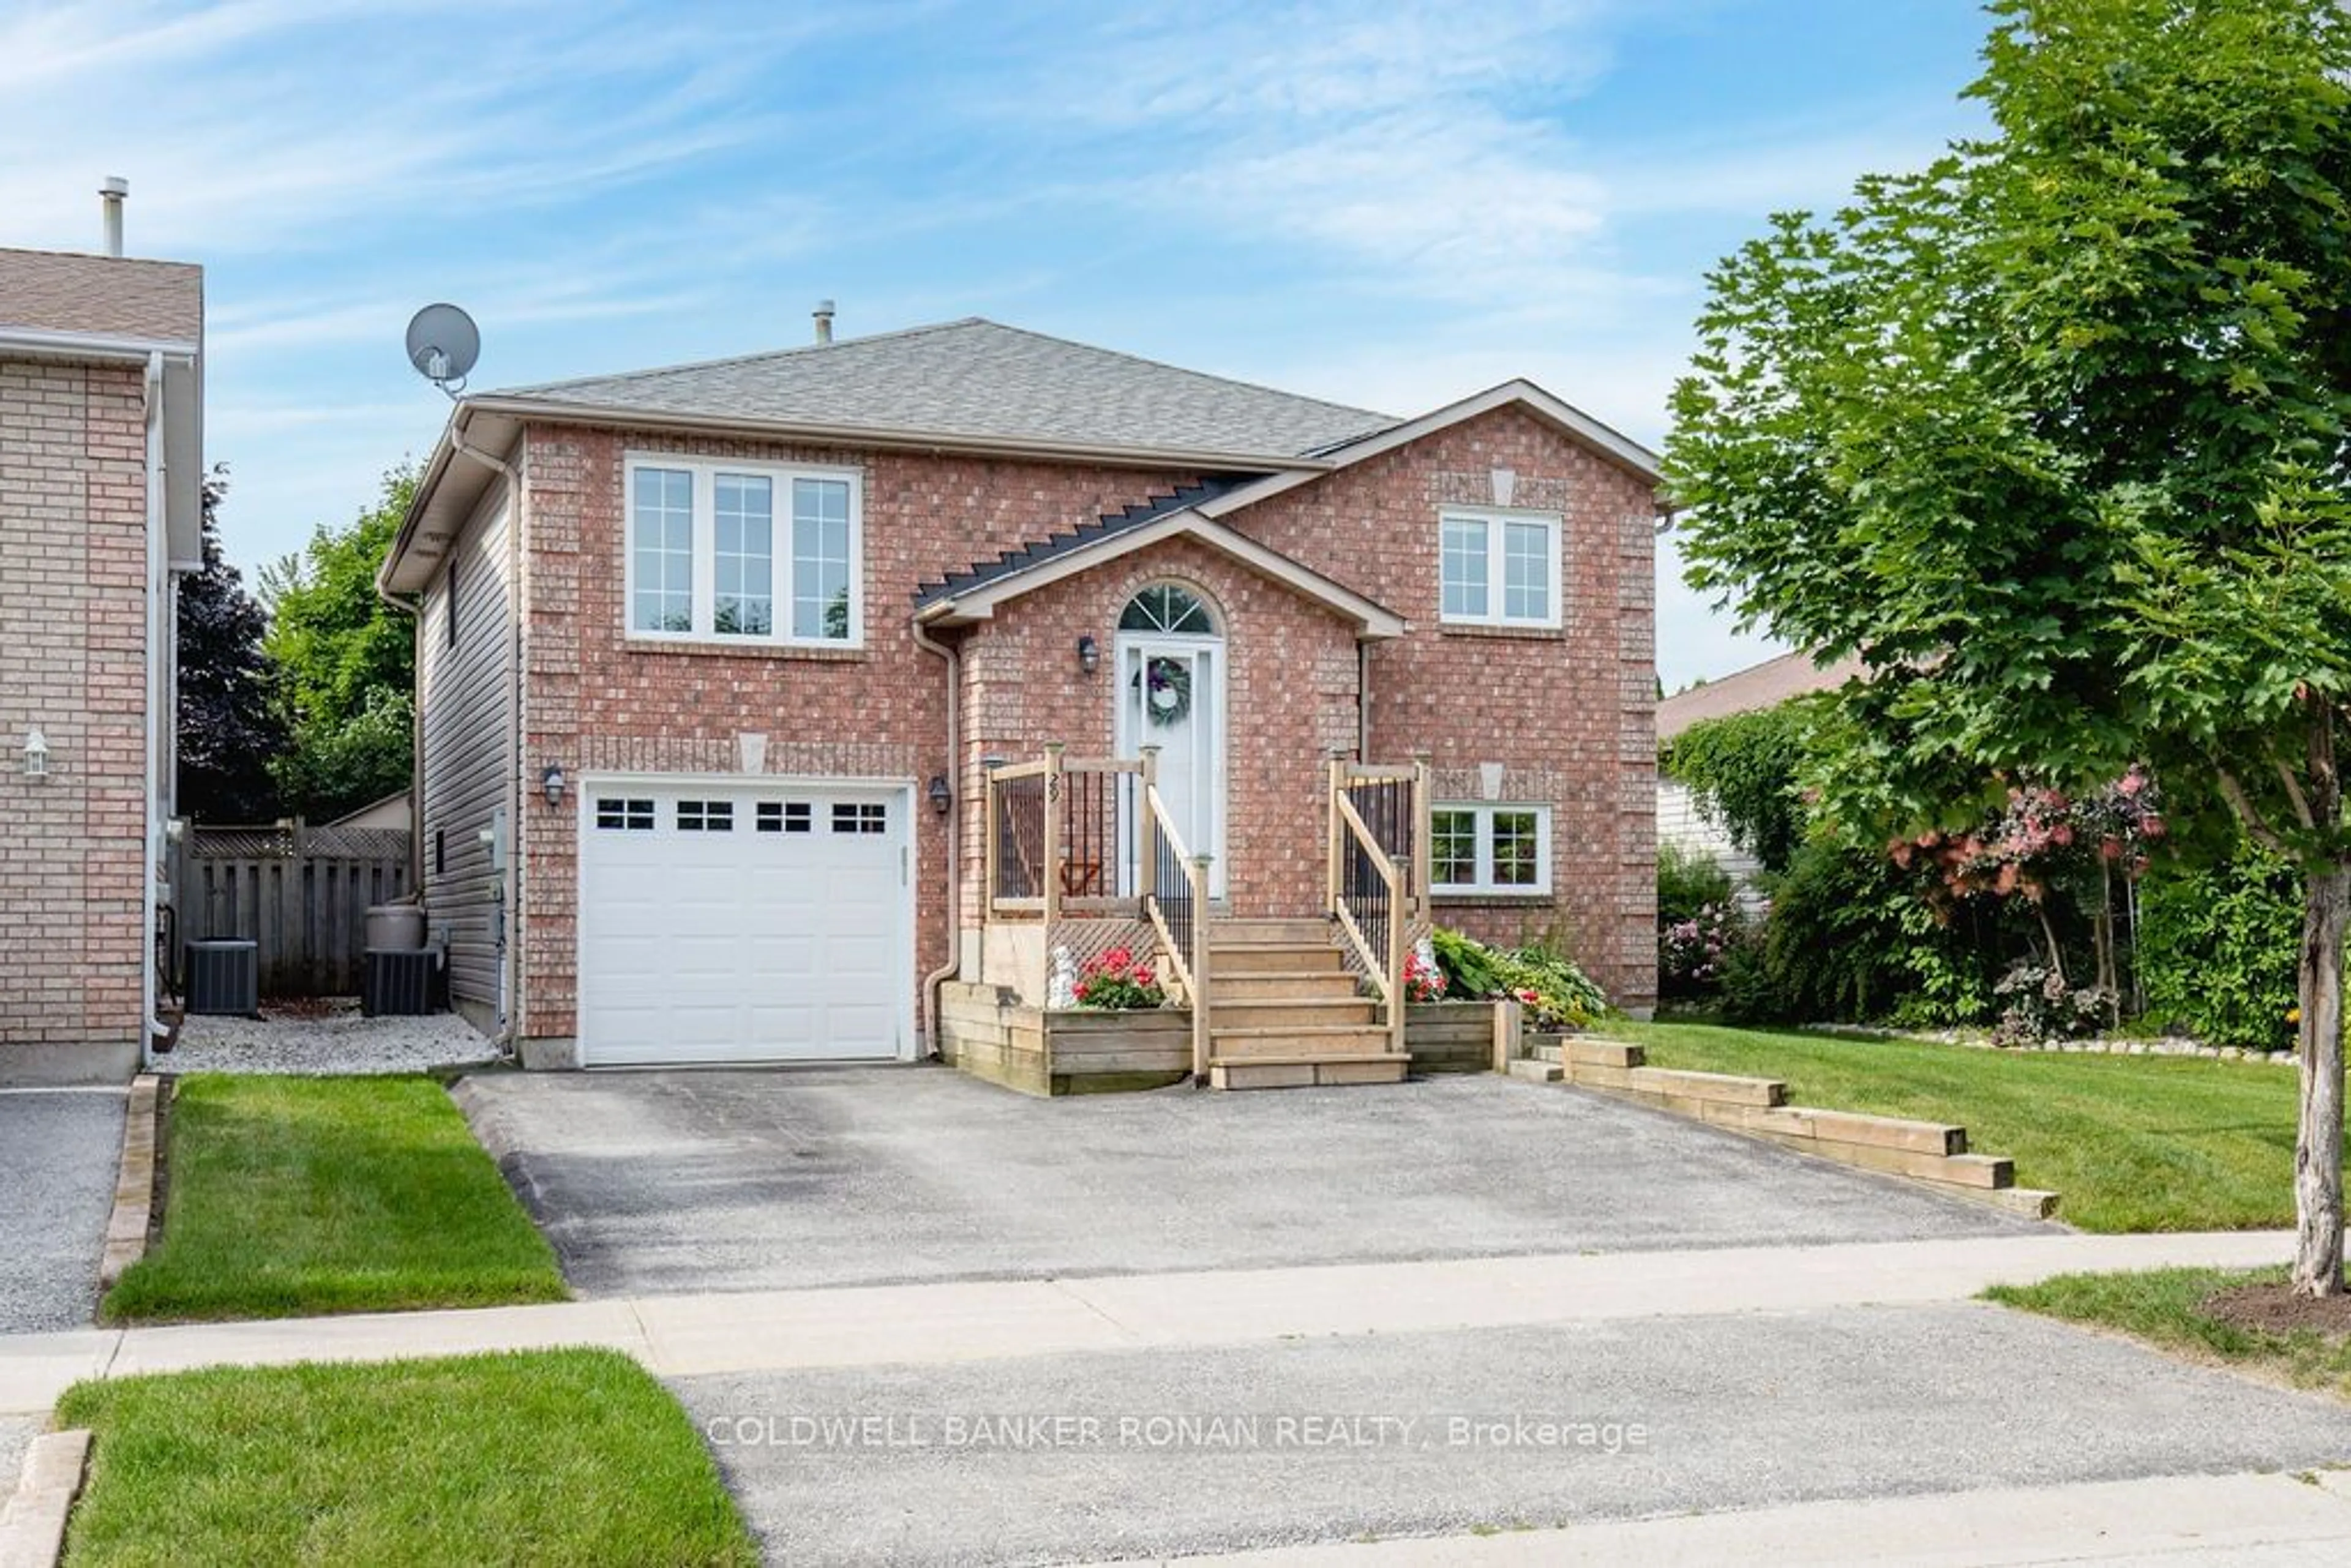 Home with brick exterior material for 29 White Elm Rd, Barrie Ontario L4N 8S9